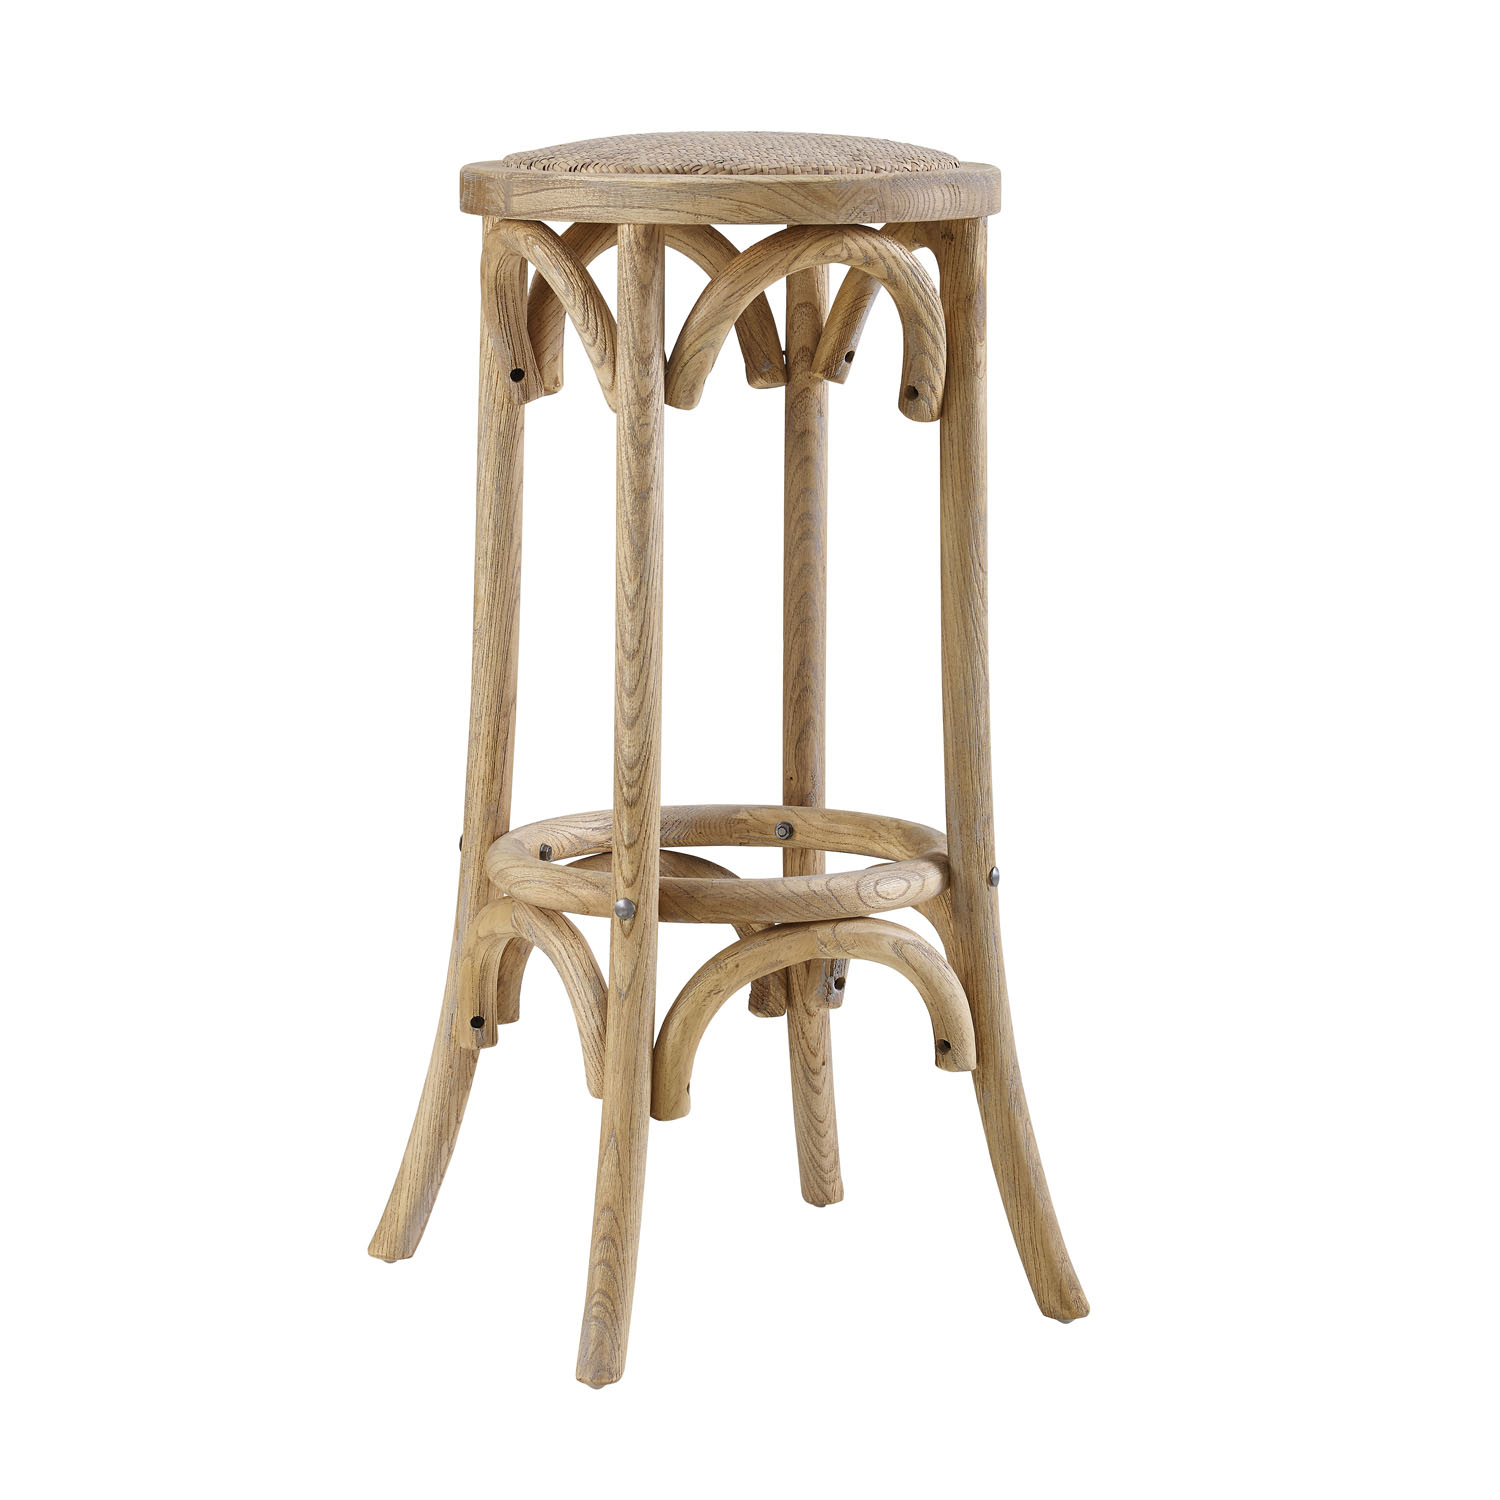 Linon Rae Backless Wood Bar Stool, 30" Seat Height, Brown Finish - image 3 of 3